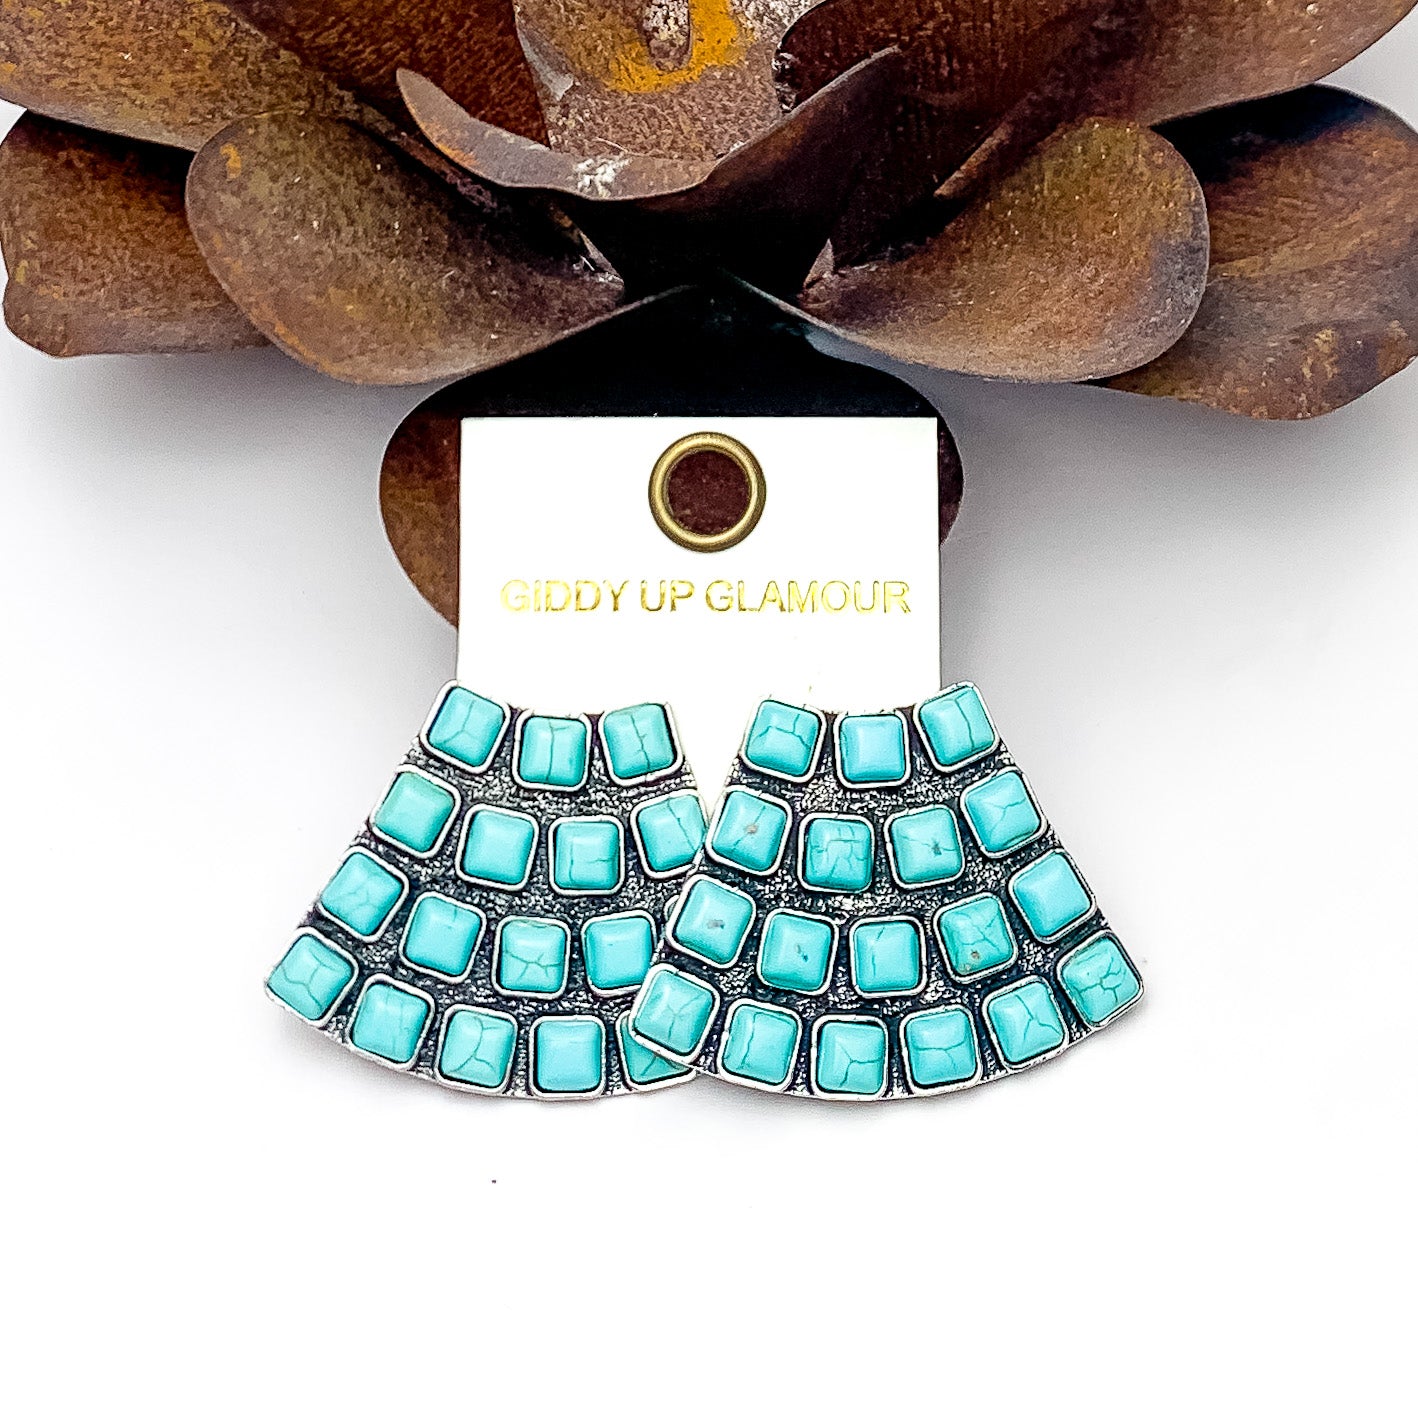 Western Trapezoid Shape Silver Tone With Stones in Turquoise. Pictured on a white background with a metal flower behind the earrings.